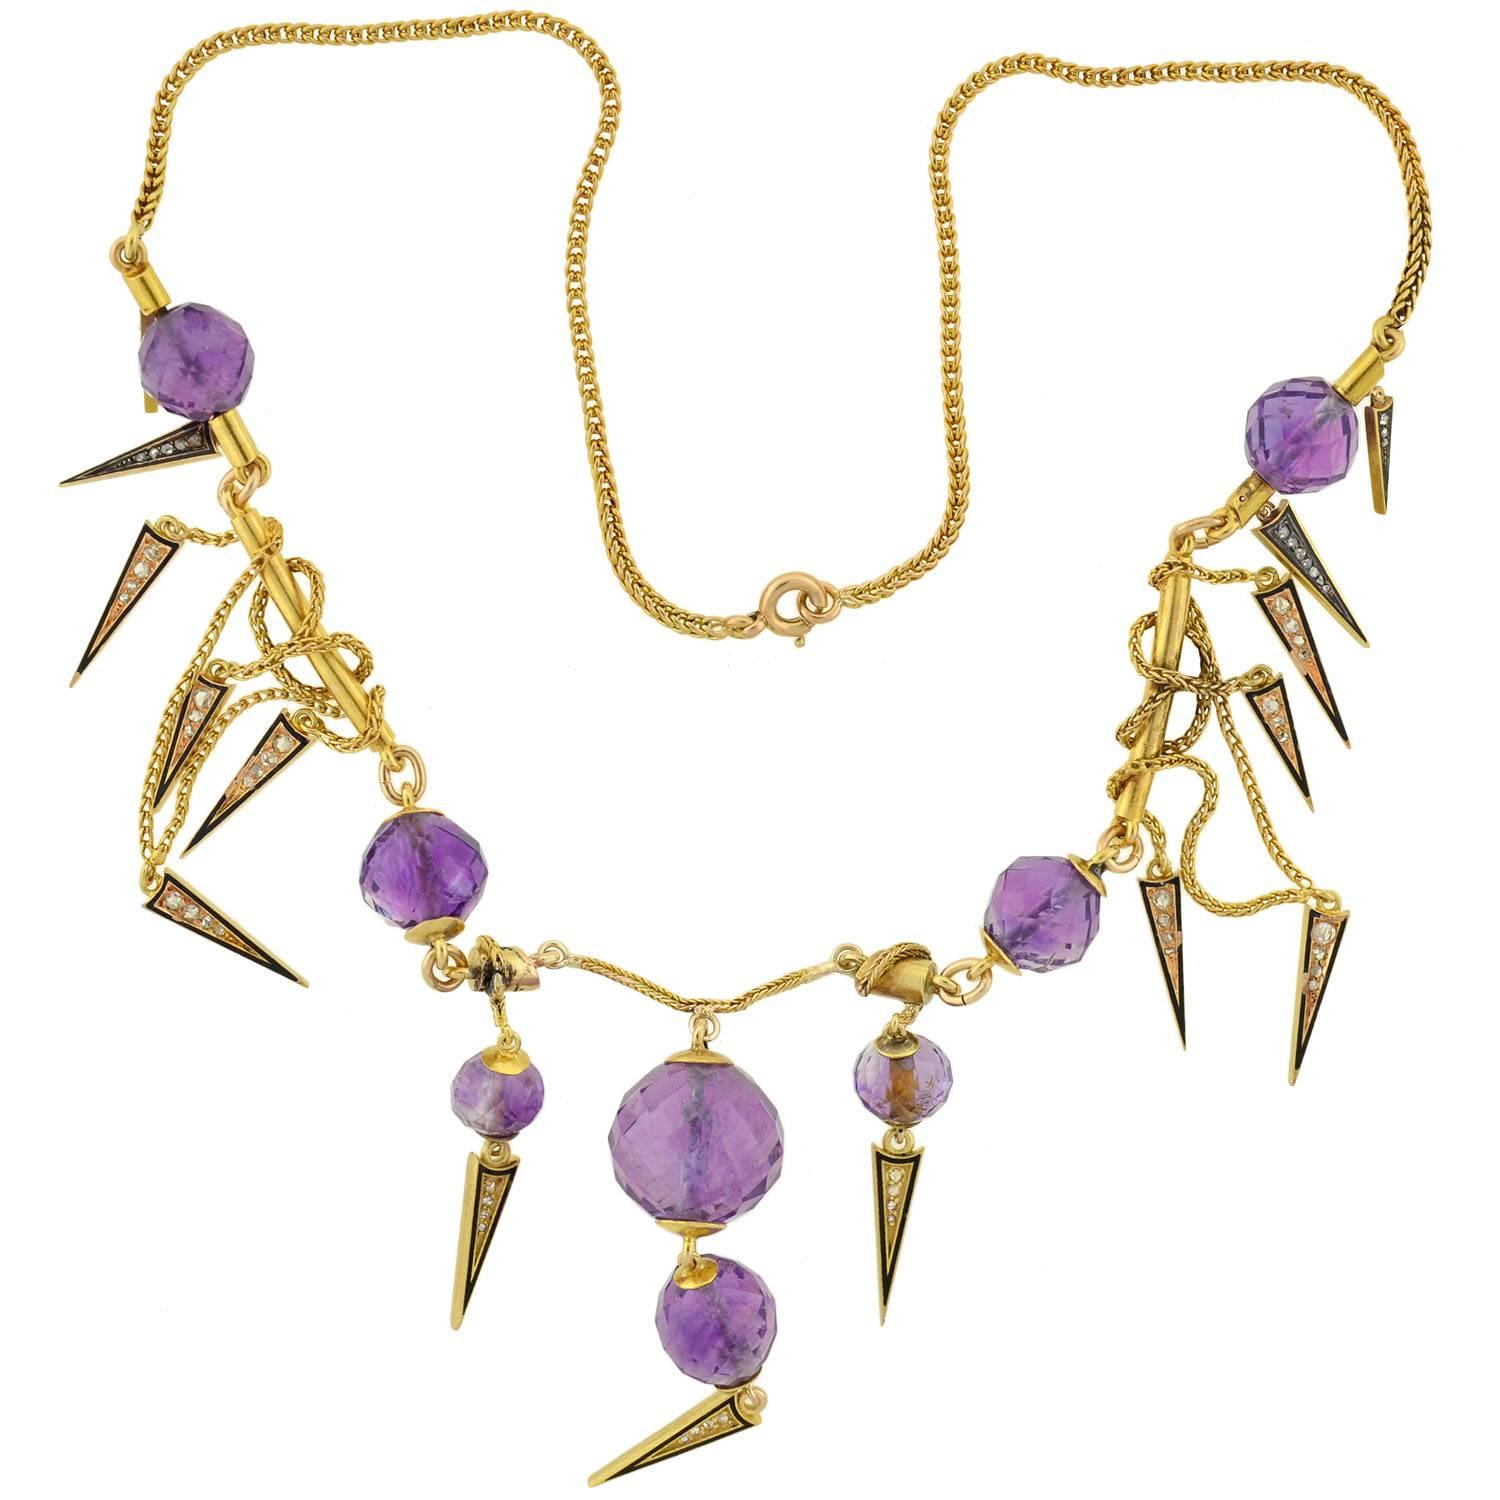 An elaborate amethyst necklace from the Victorian period (ca1880)! This magnificent piece is crafted in 14kt yellow gold, and has a very decorative festoon design. There are 8 amethyst beads interspersed throughout the piece, each with a